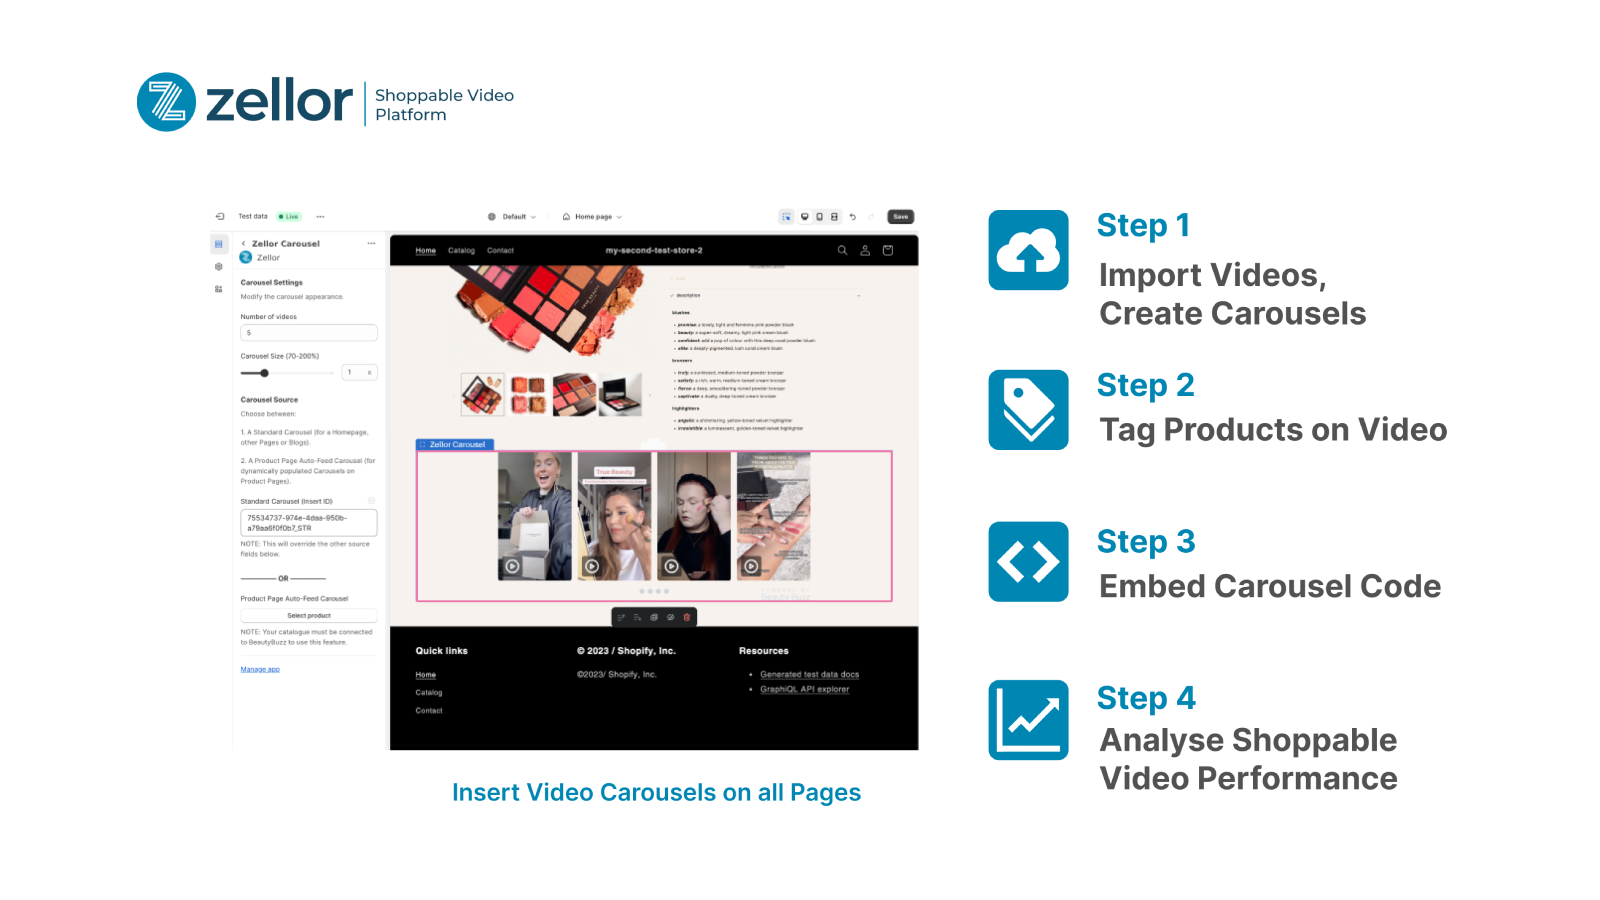 Insert video carousels on all product pages